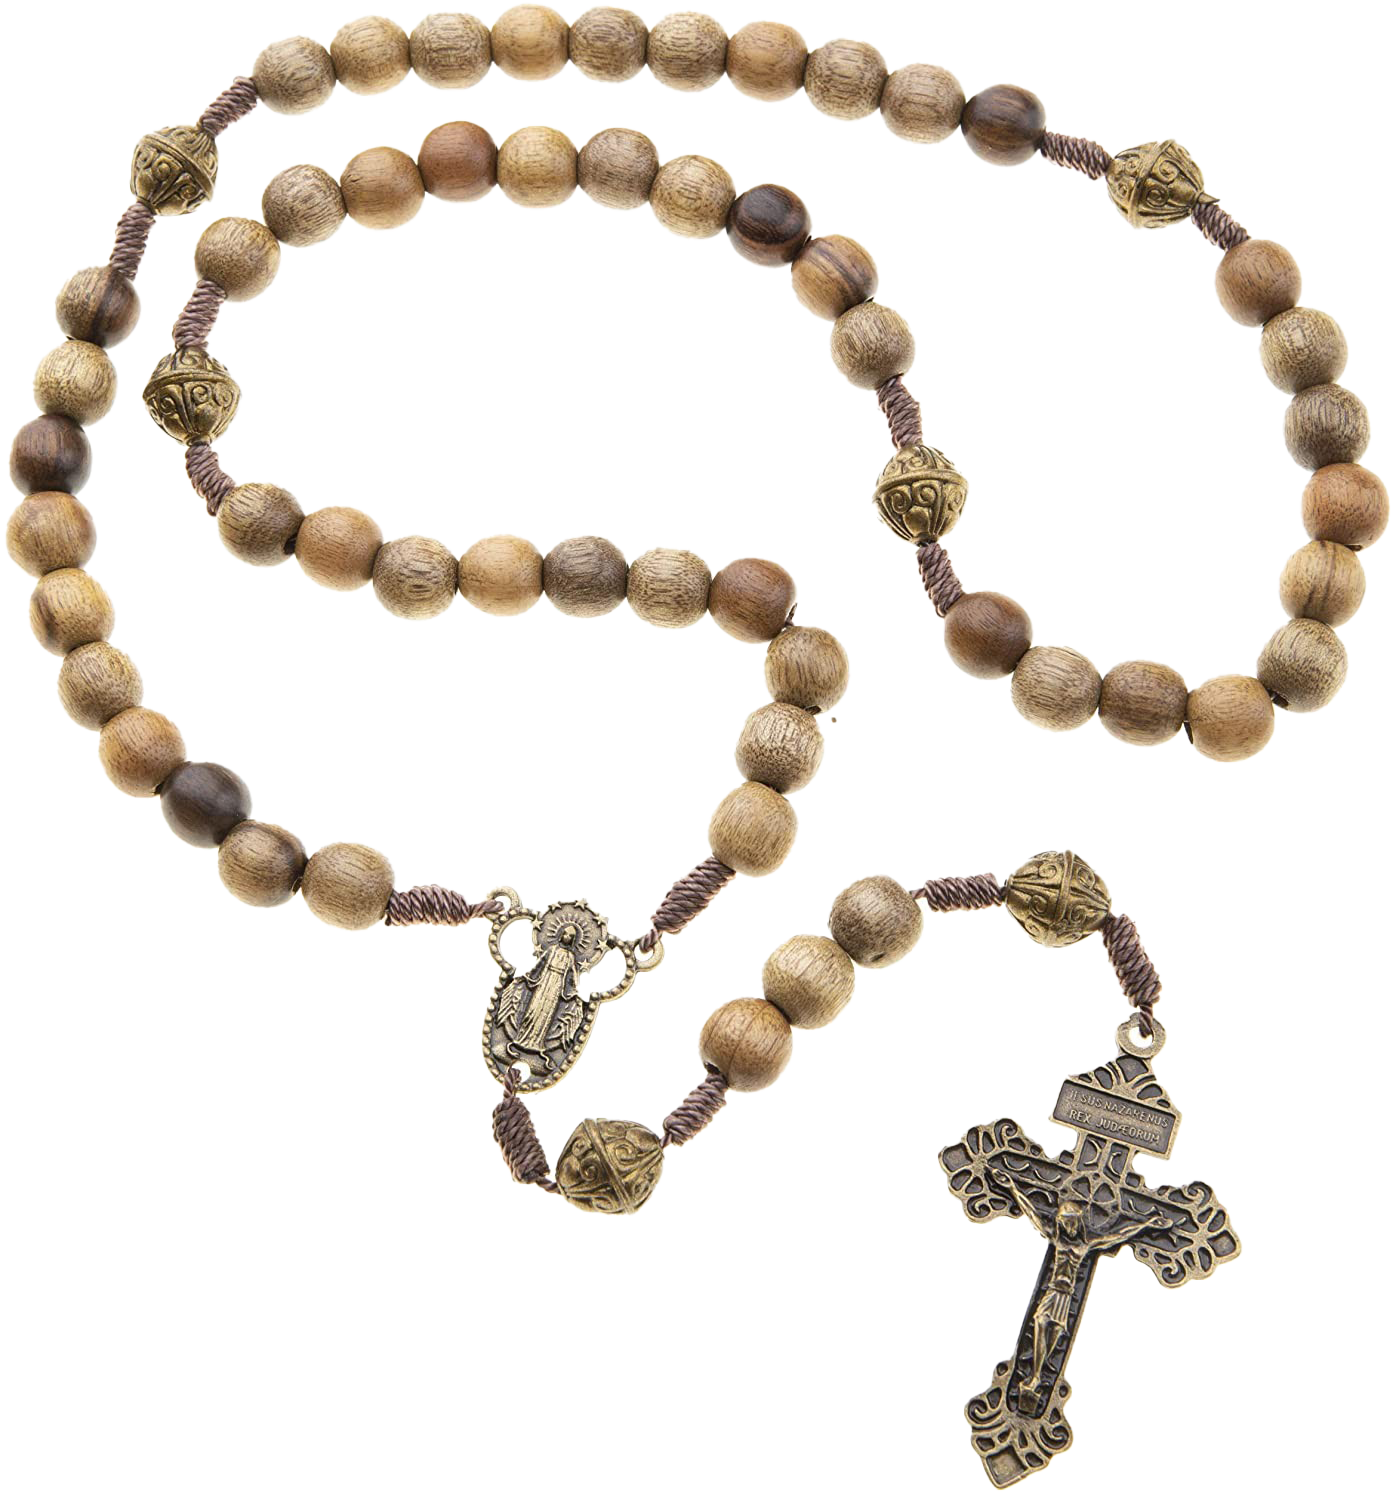 High-Quality Beads Rosary HQ Image Free PNG Image